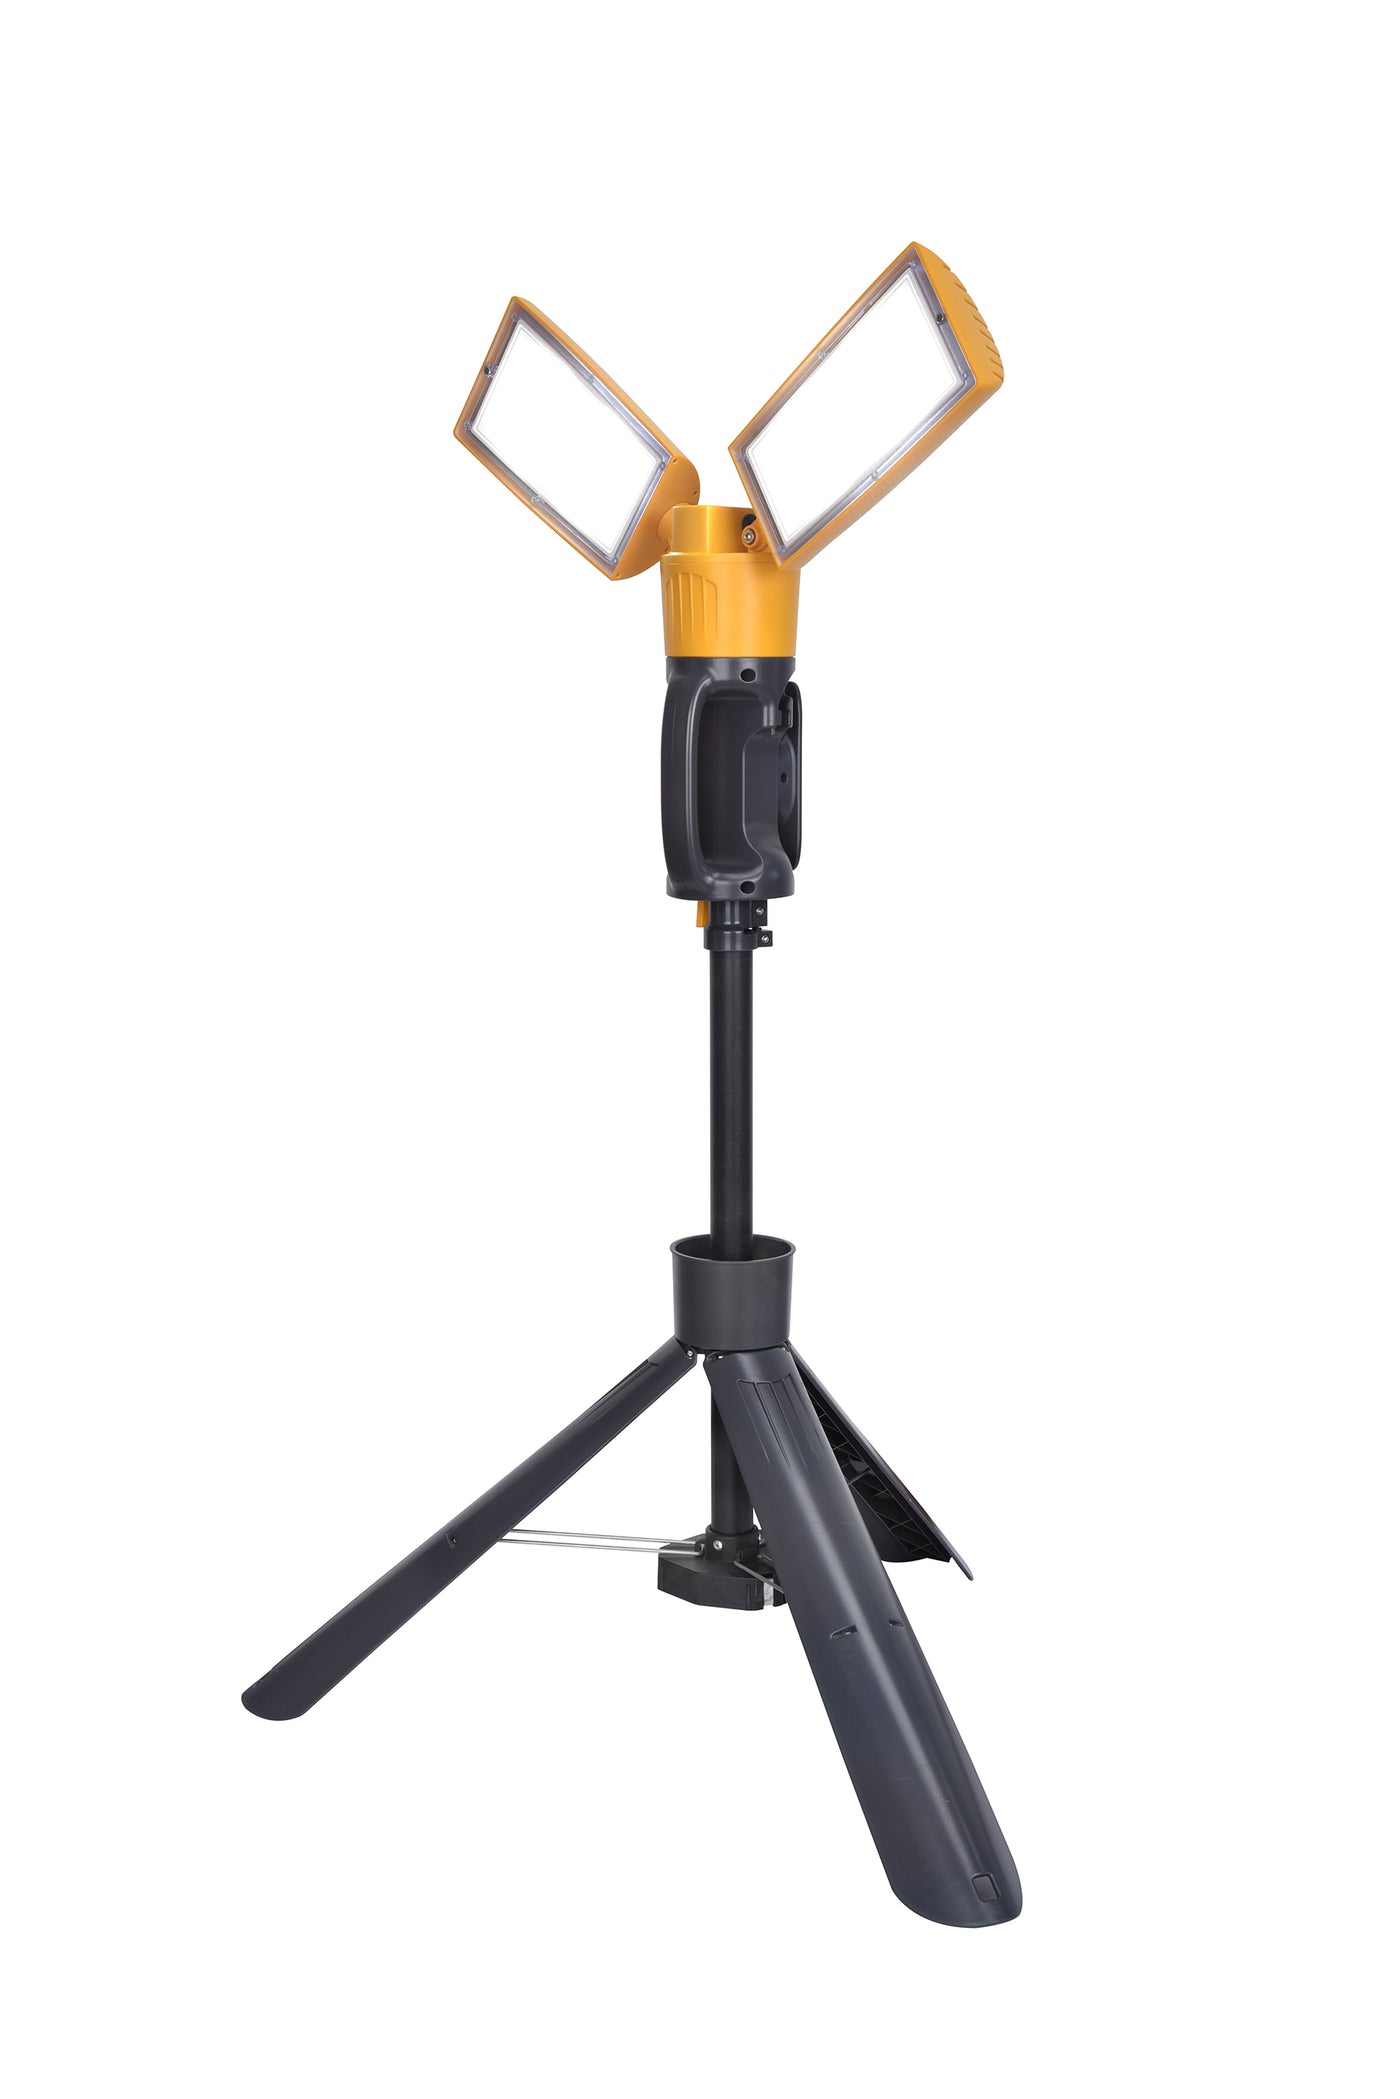 LUTEC-PERI L 5000LM, 5000K, 38W, Portable LED Work Light With Dual Adjustable Heads, Telescopic Foldable Tripod Stand